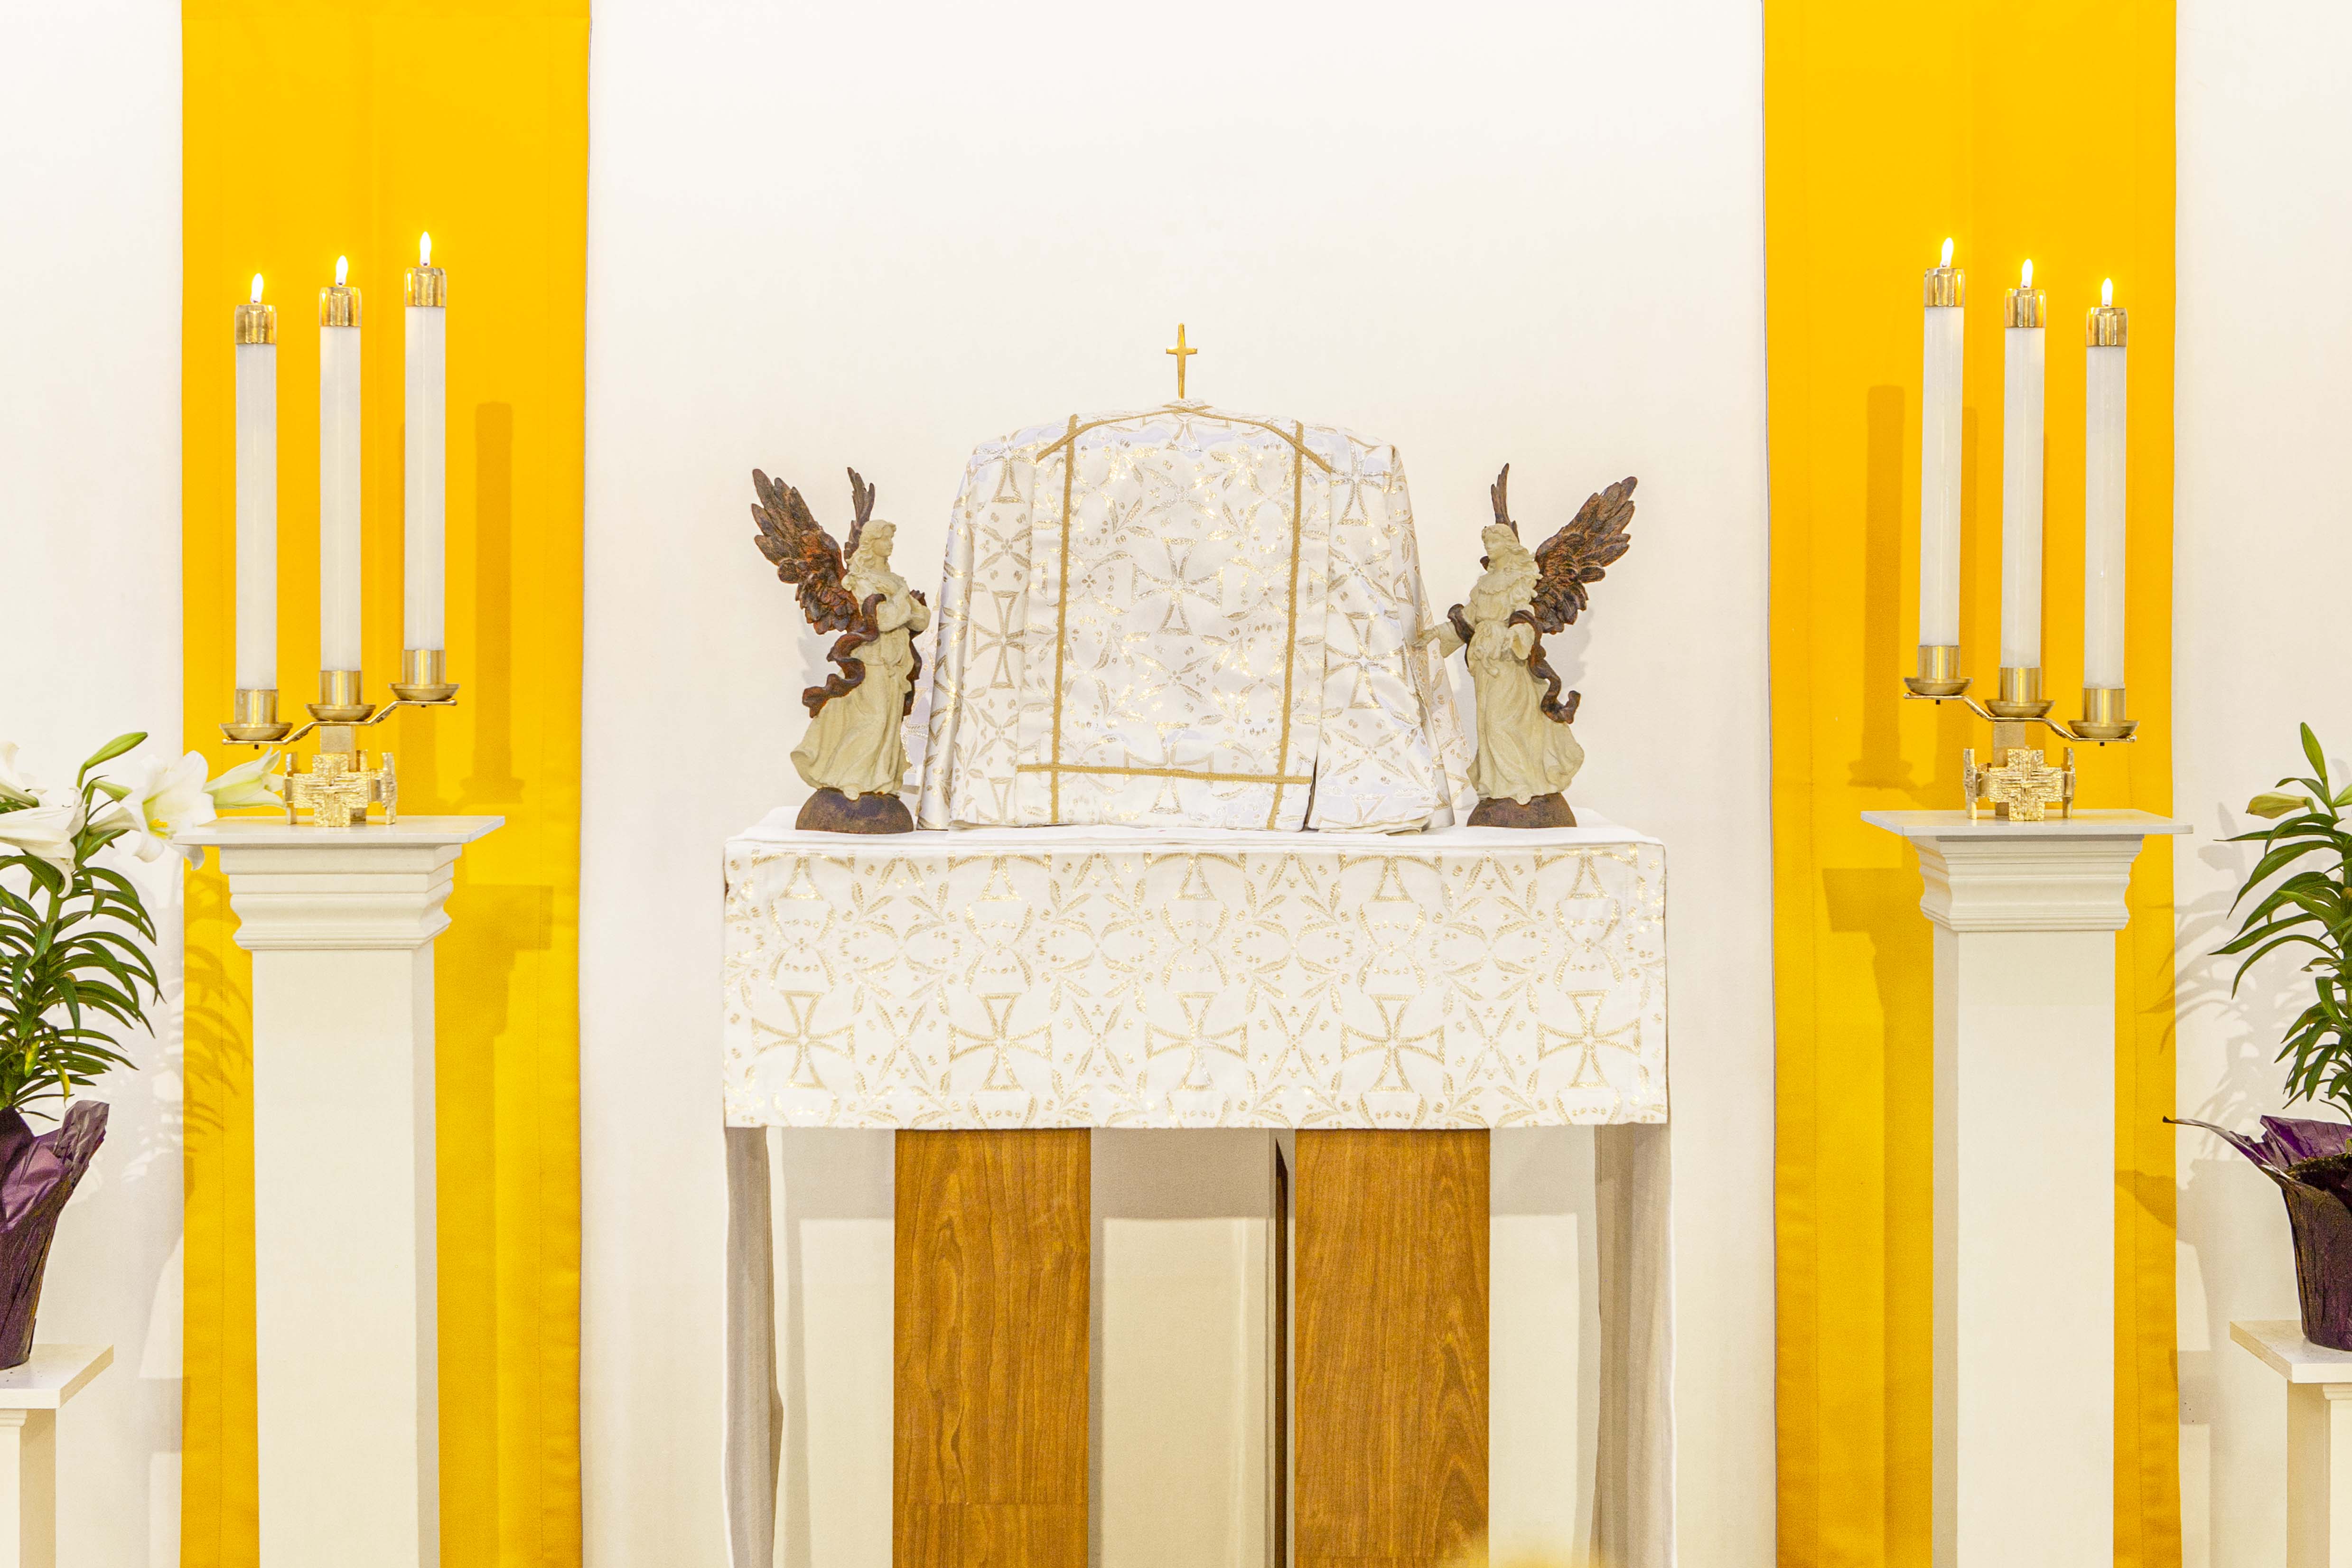 Tabernacle in Easter colours of yellow